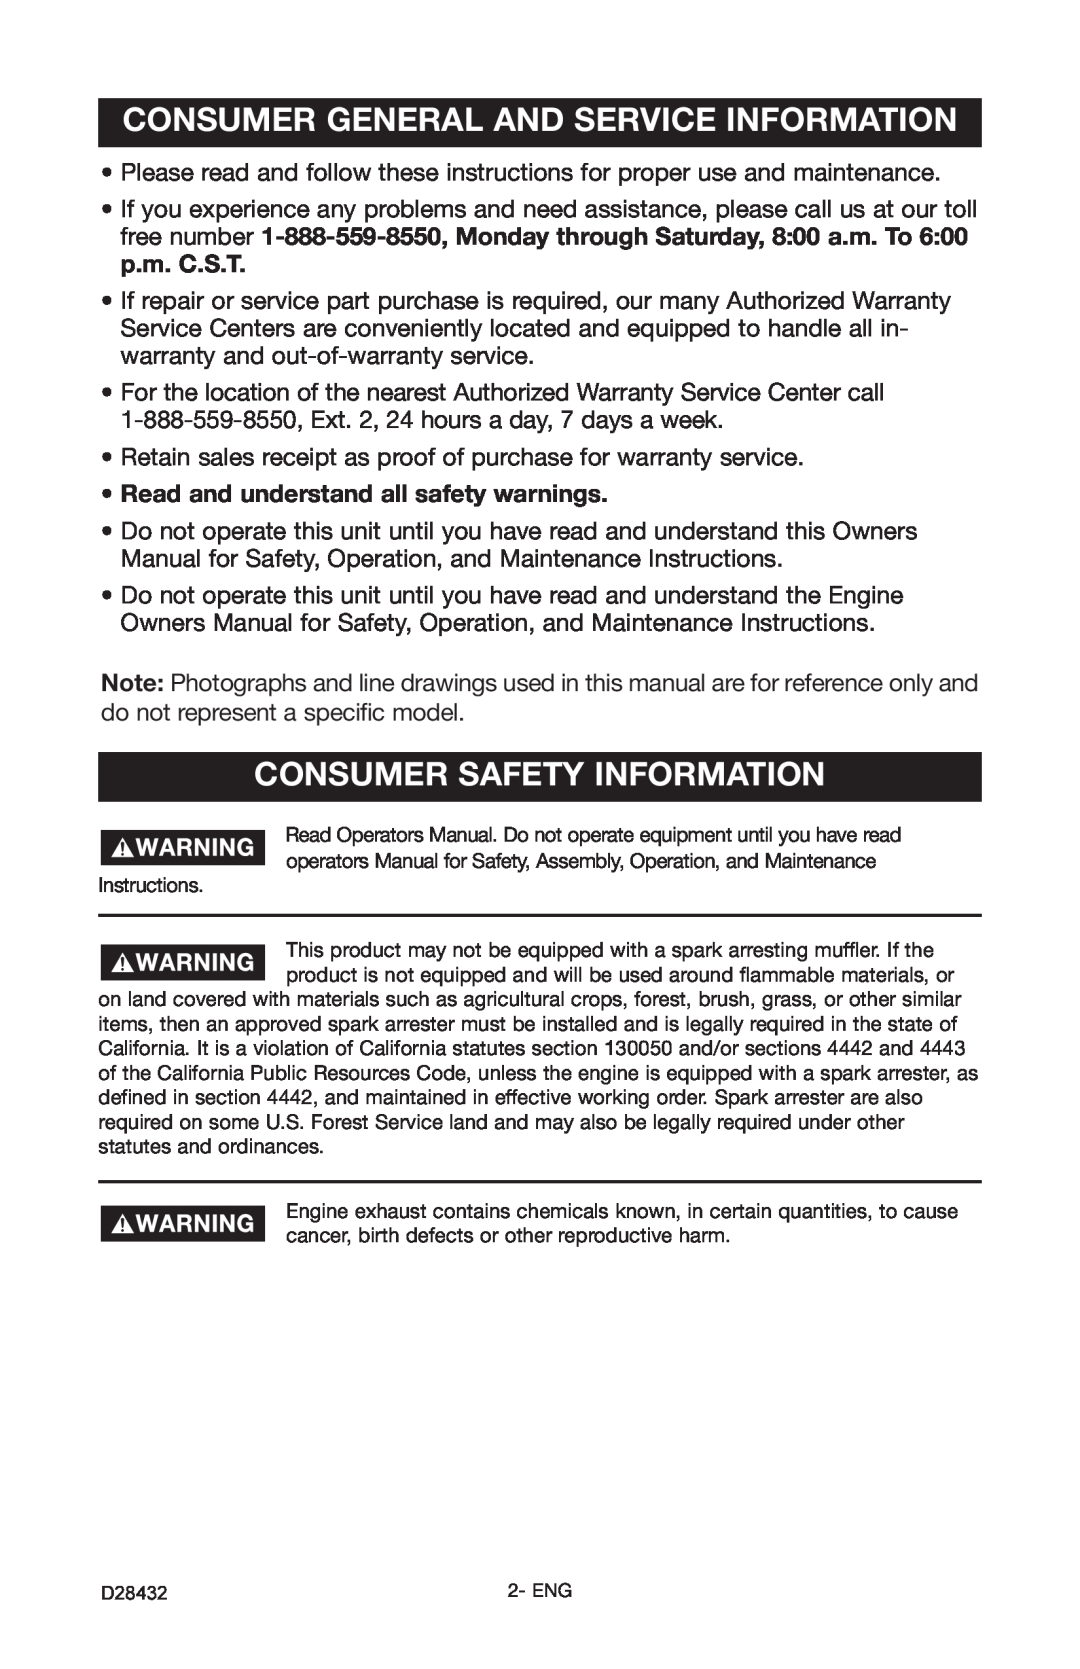 Porter-Cable CH350IS instruction manual Consumer General And Service Information, Consumer Safety Information 